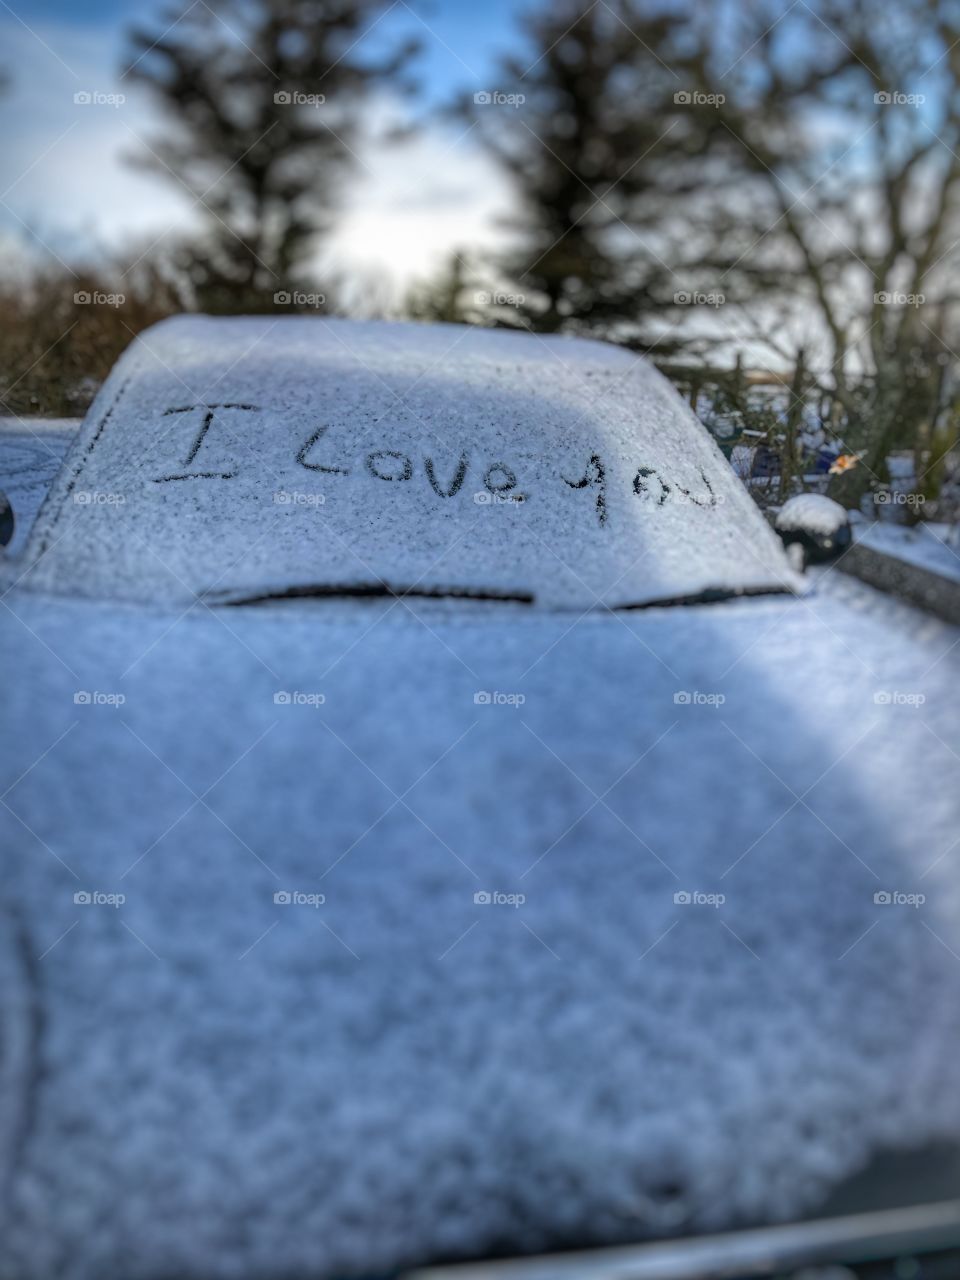 I Love You in the snow